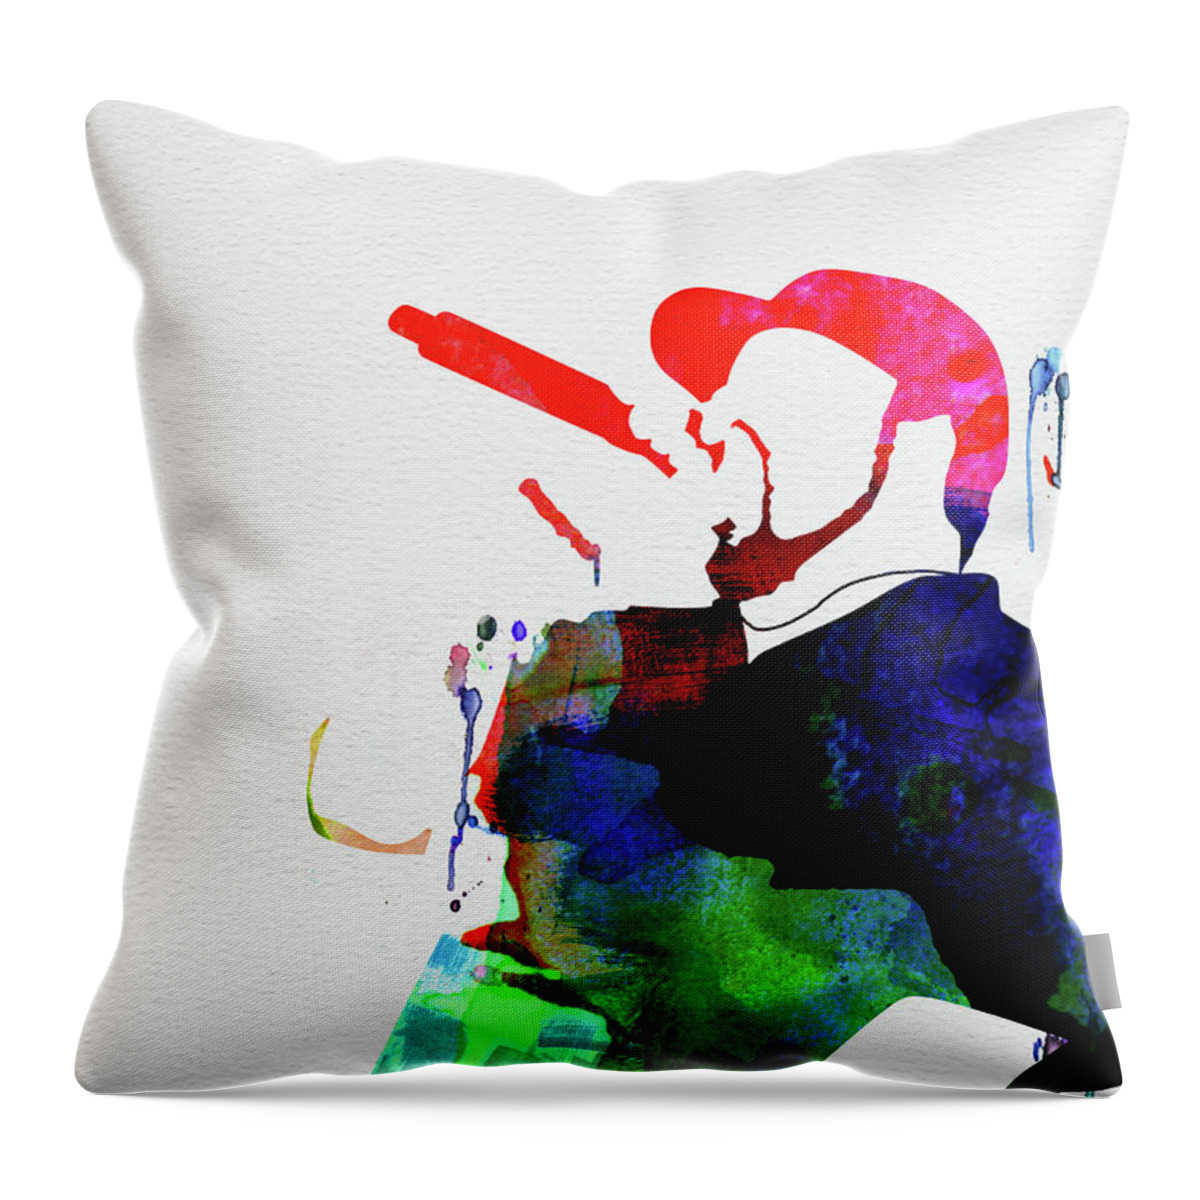 Ice Cube Throw Pillow featuring the mixed media Ice Cube Watercolor by Naxart Studio